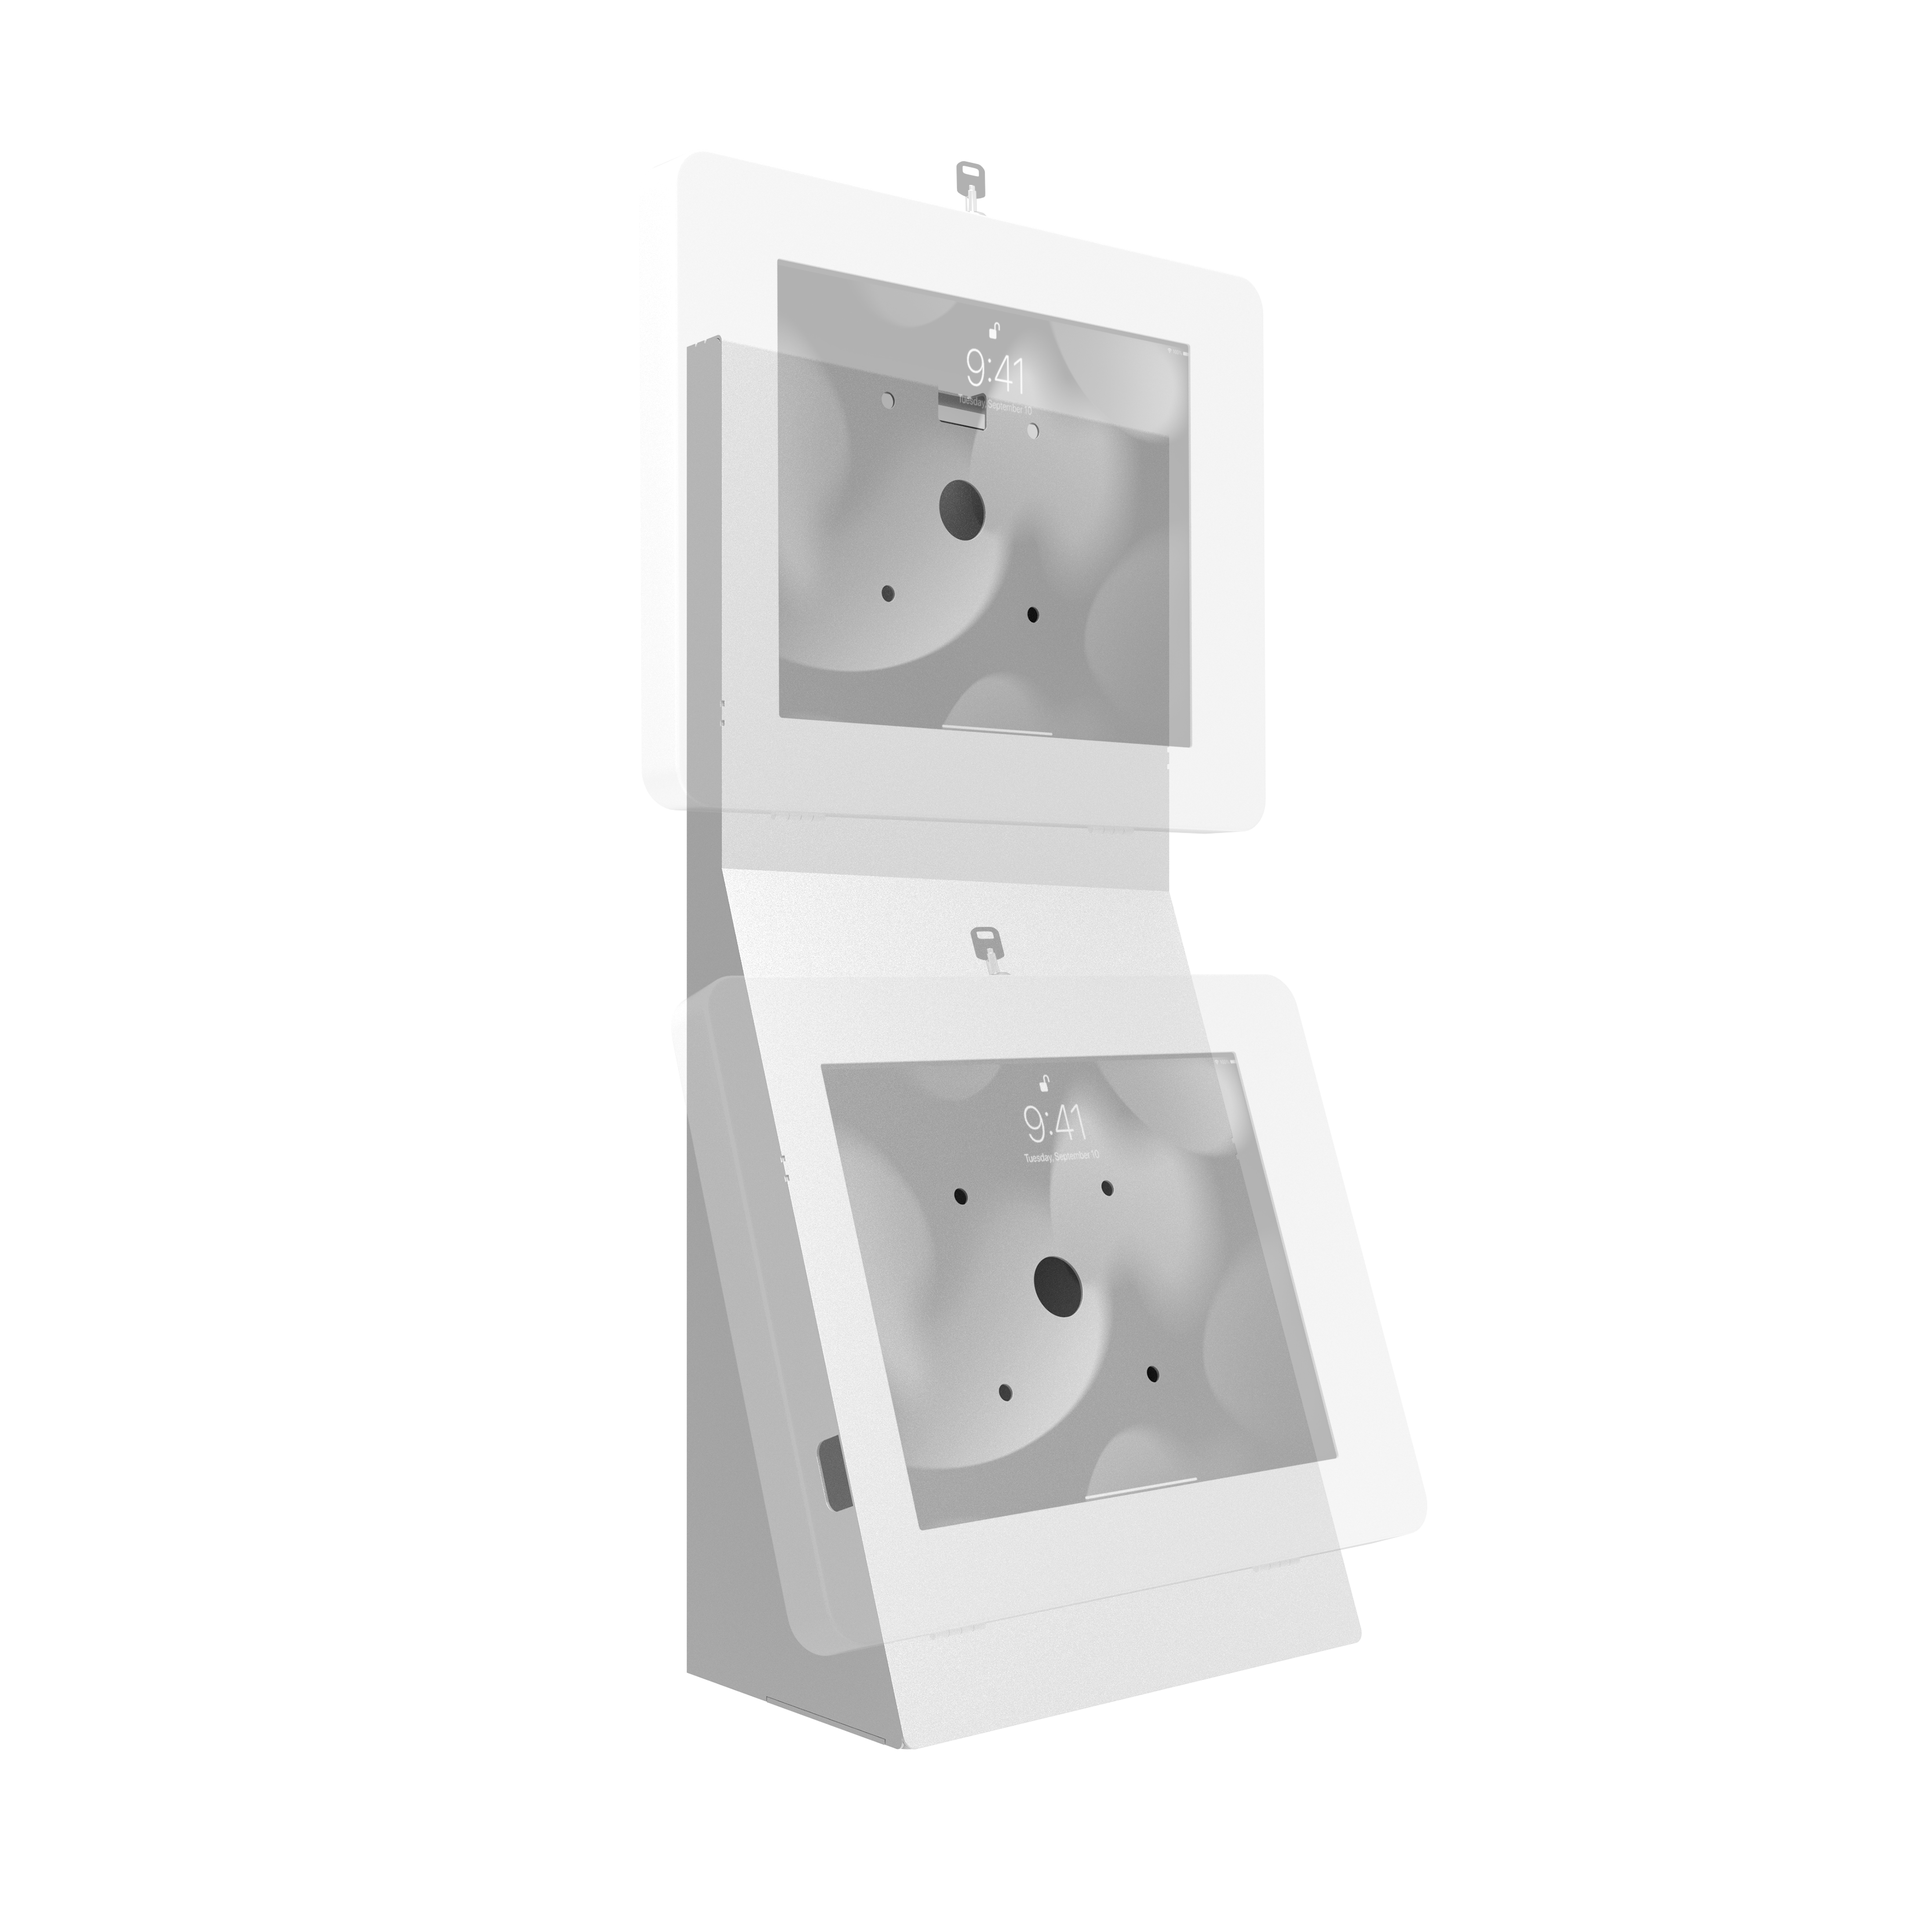 Dual Security Enclosure Desk Mount w/ Storage Compartment for iPad Air 11 inch - M2 (2024), iPad Pro 11 inch - M4 (2024) & more